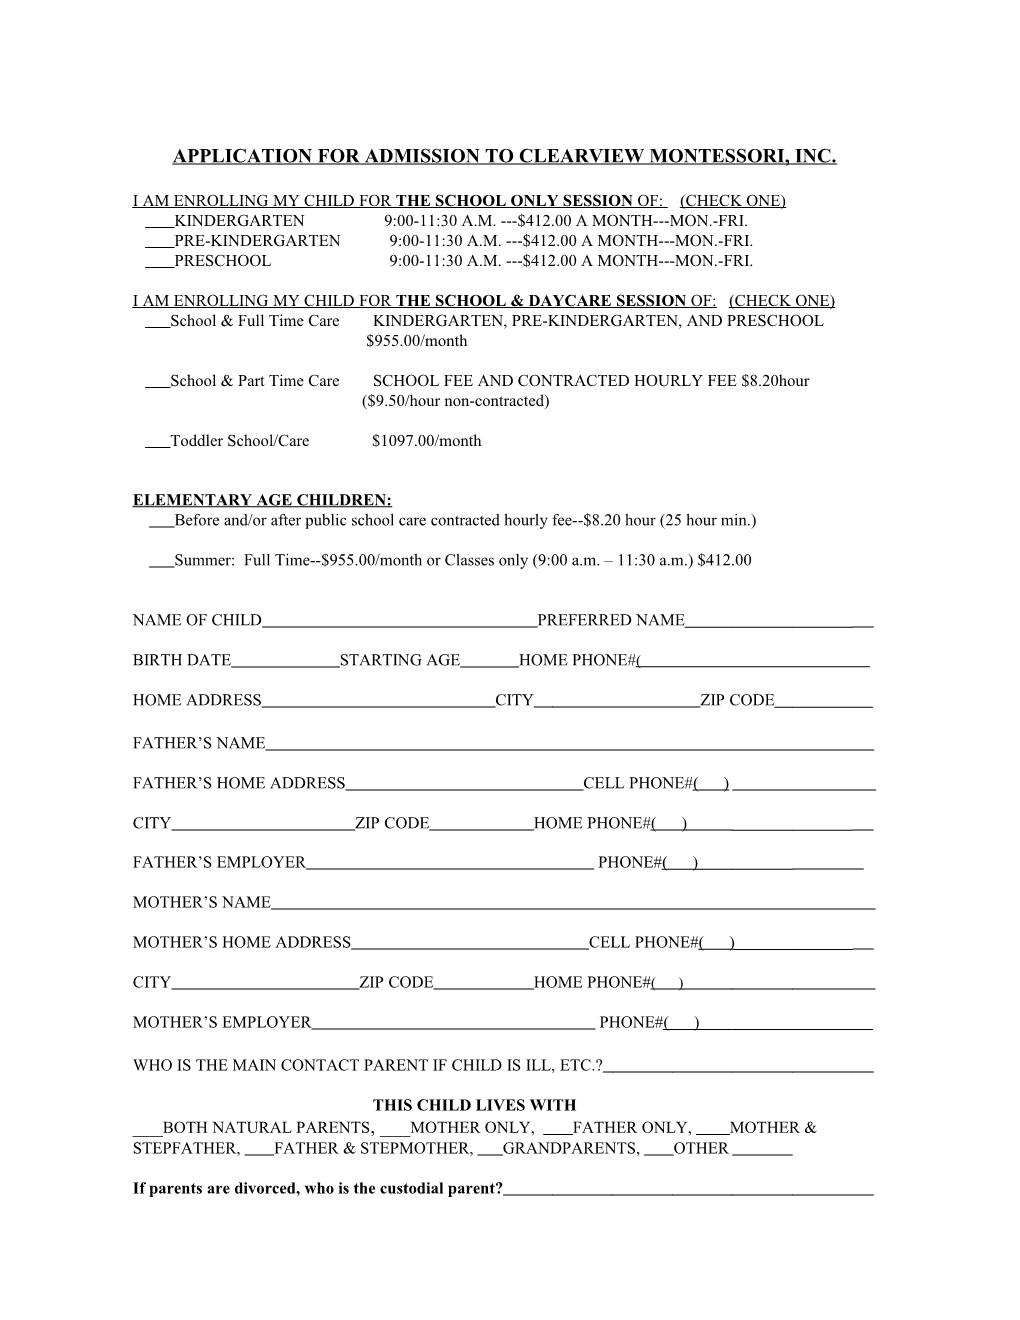 Application for Admission to Clearview Montessori, Inc